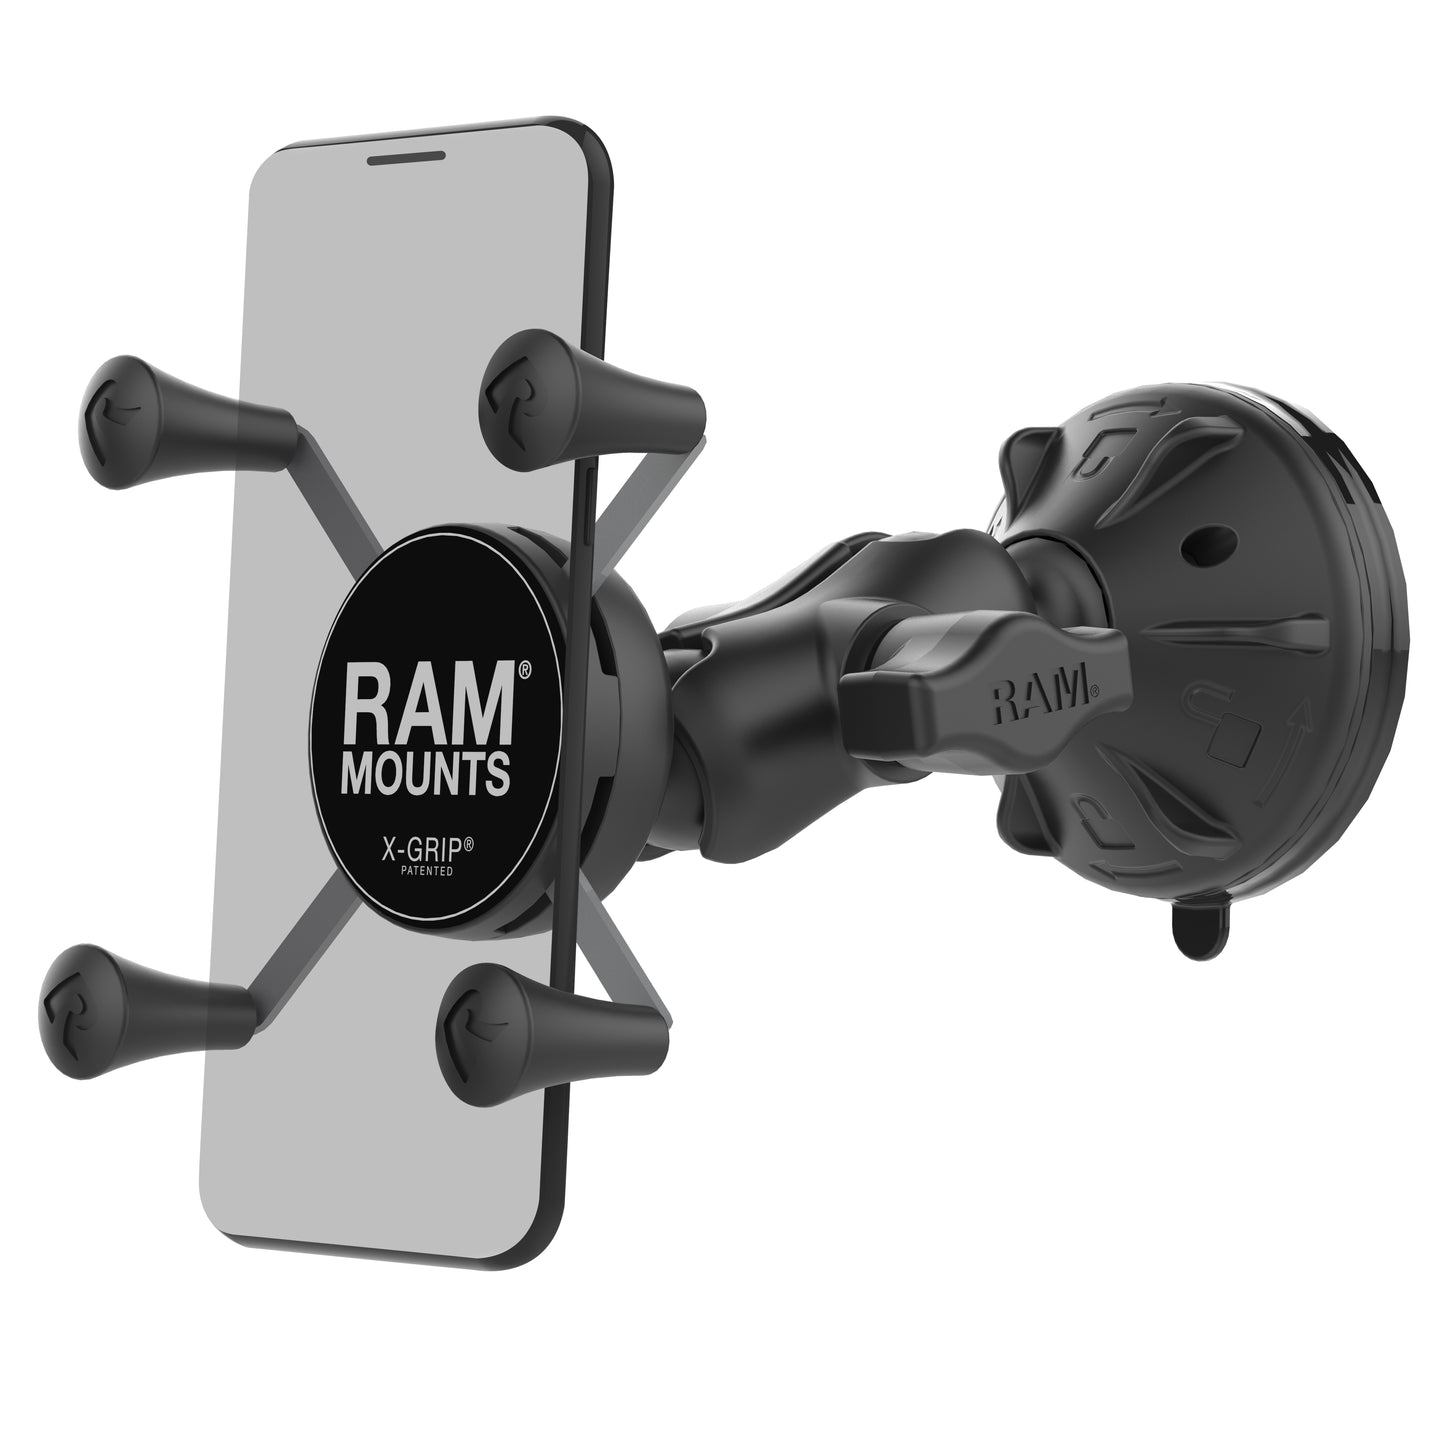 RAM Mounts X-Grip® Phone Mount with Low Profile Suction Cup - Short - image 1 of 7